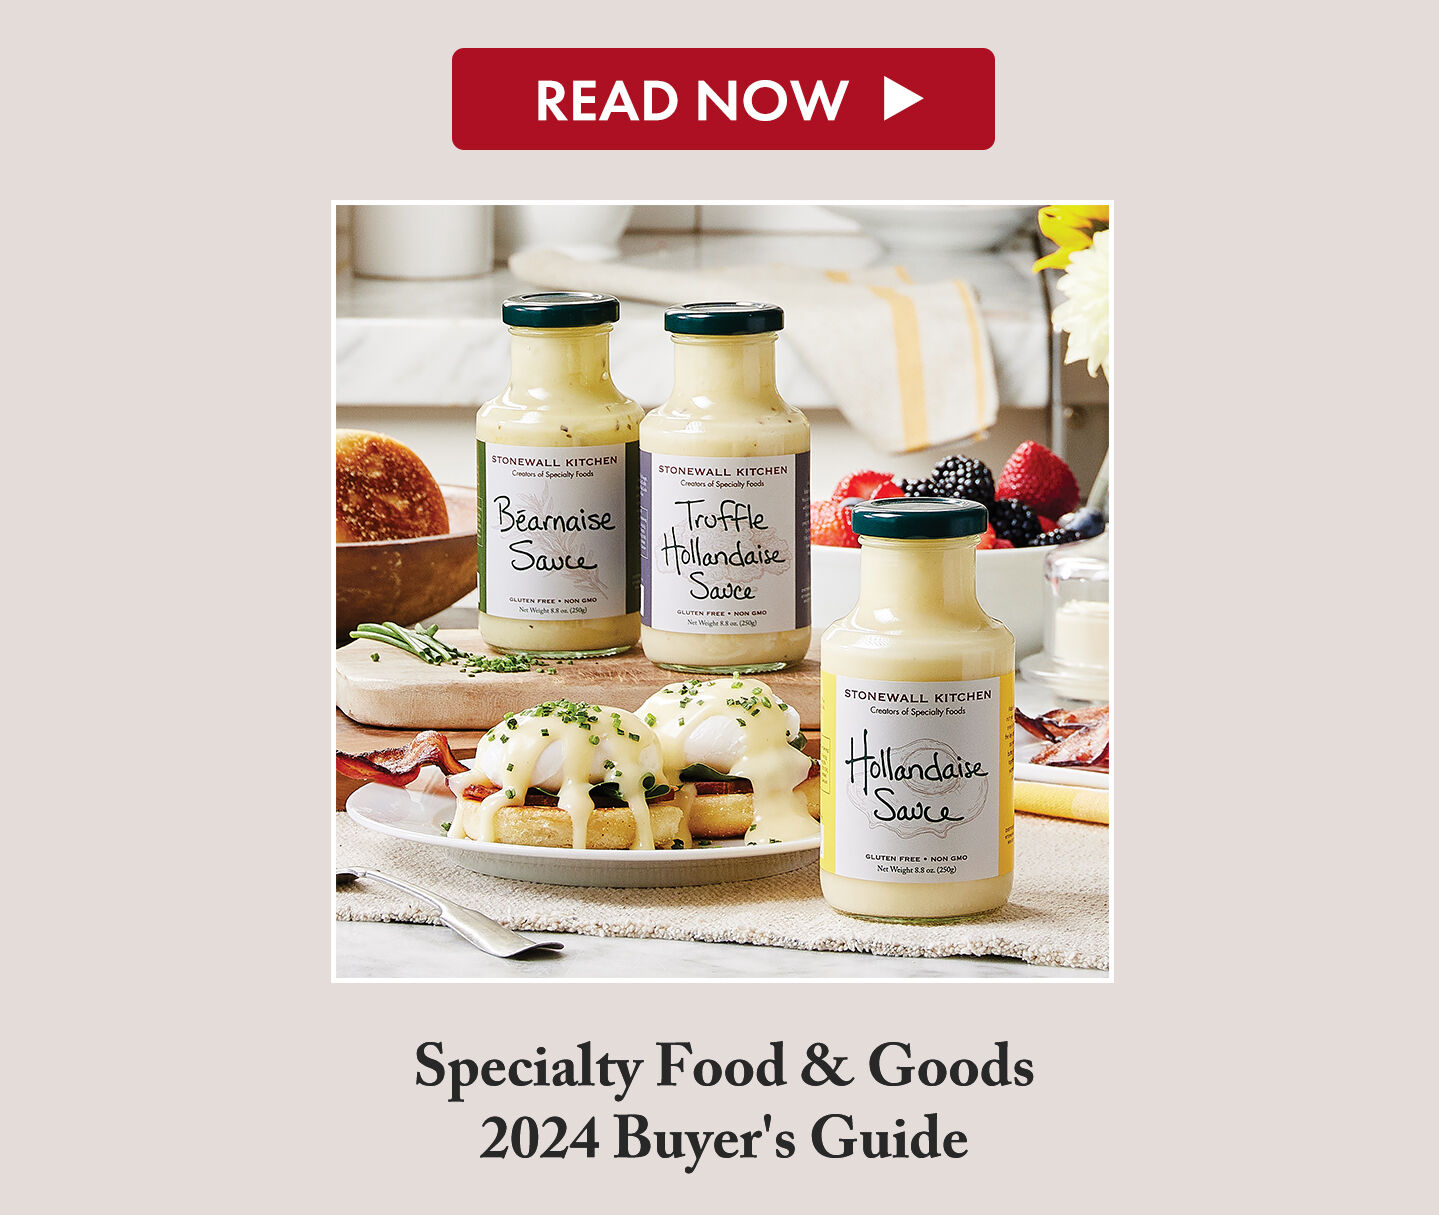 Specialty Food & Goods 2024 Buyer's Guide - Read Now